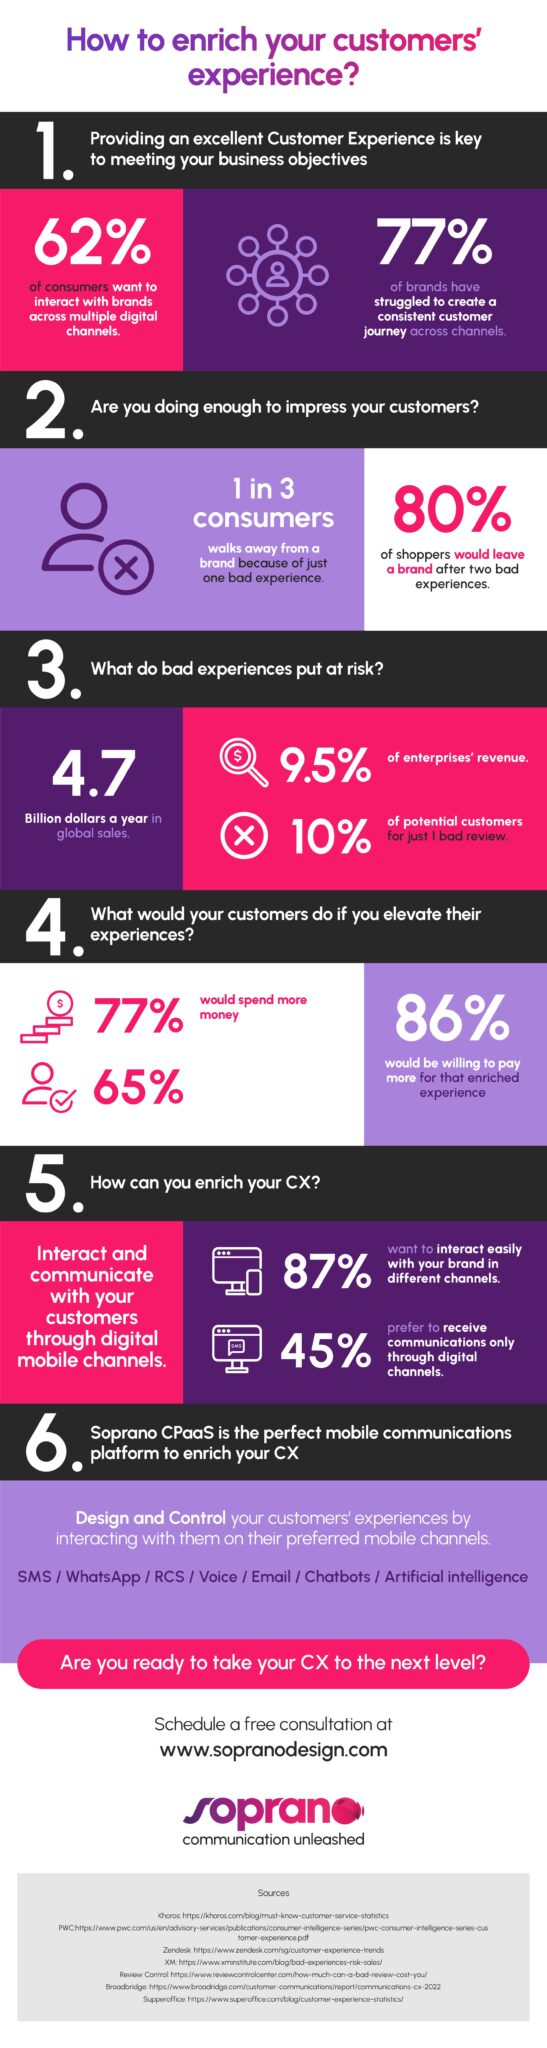 infographic how to enrich your customers experience